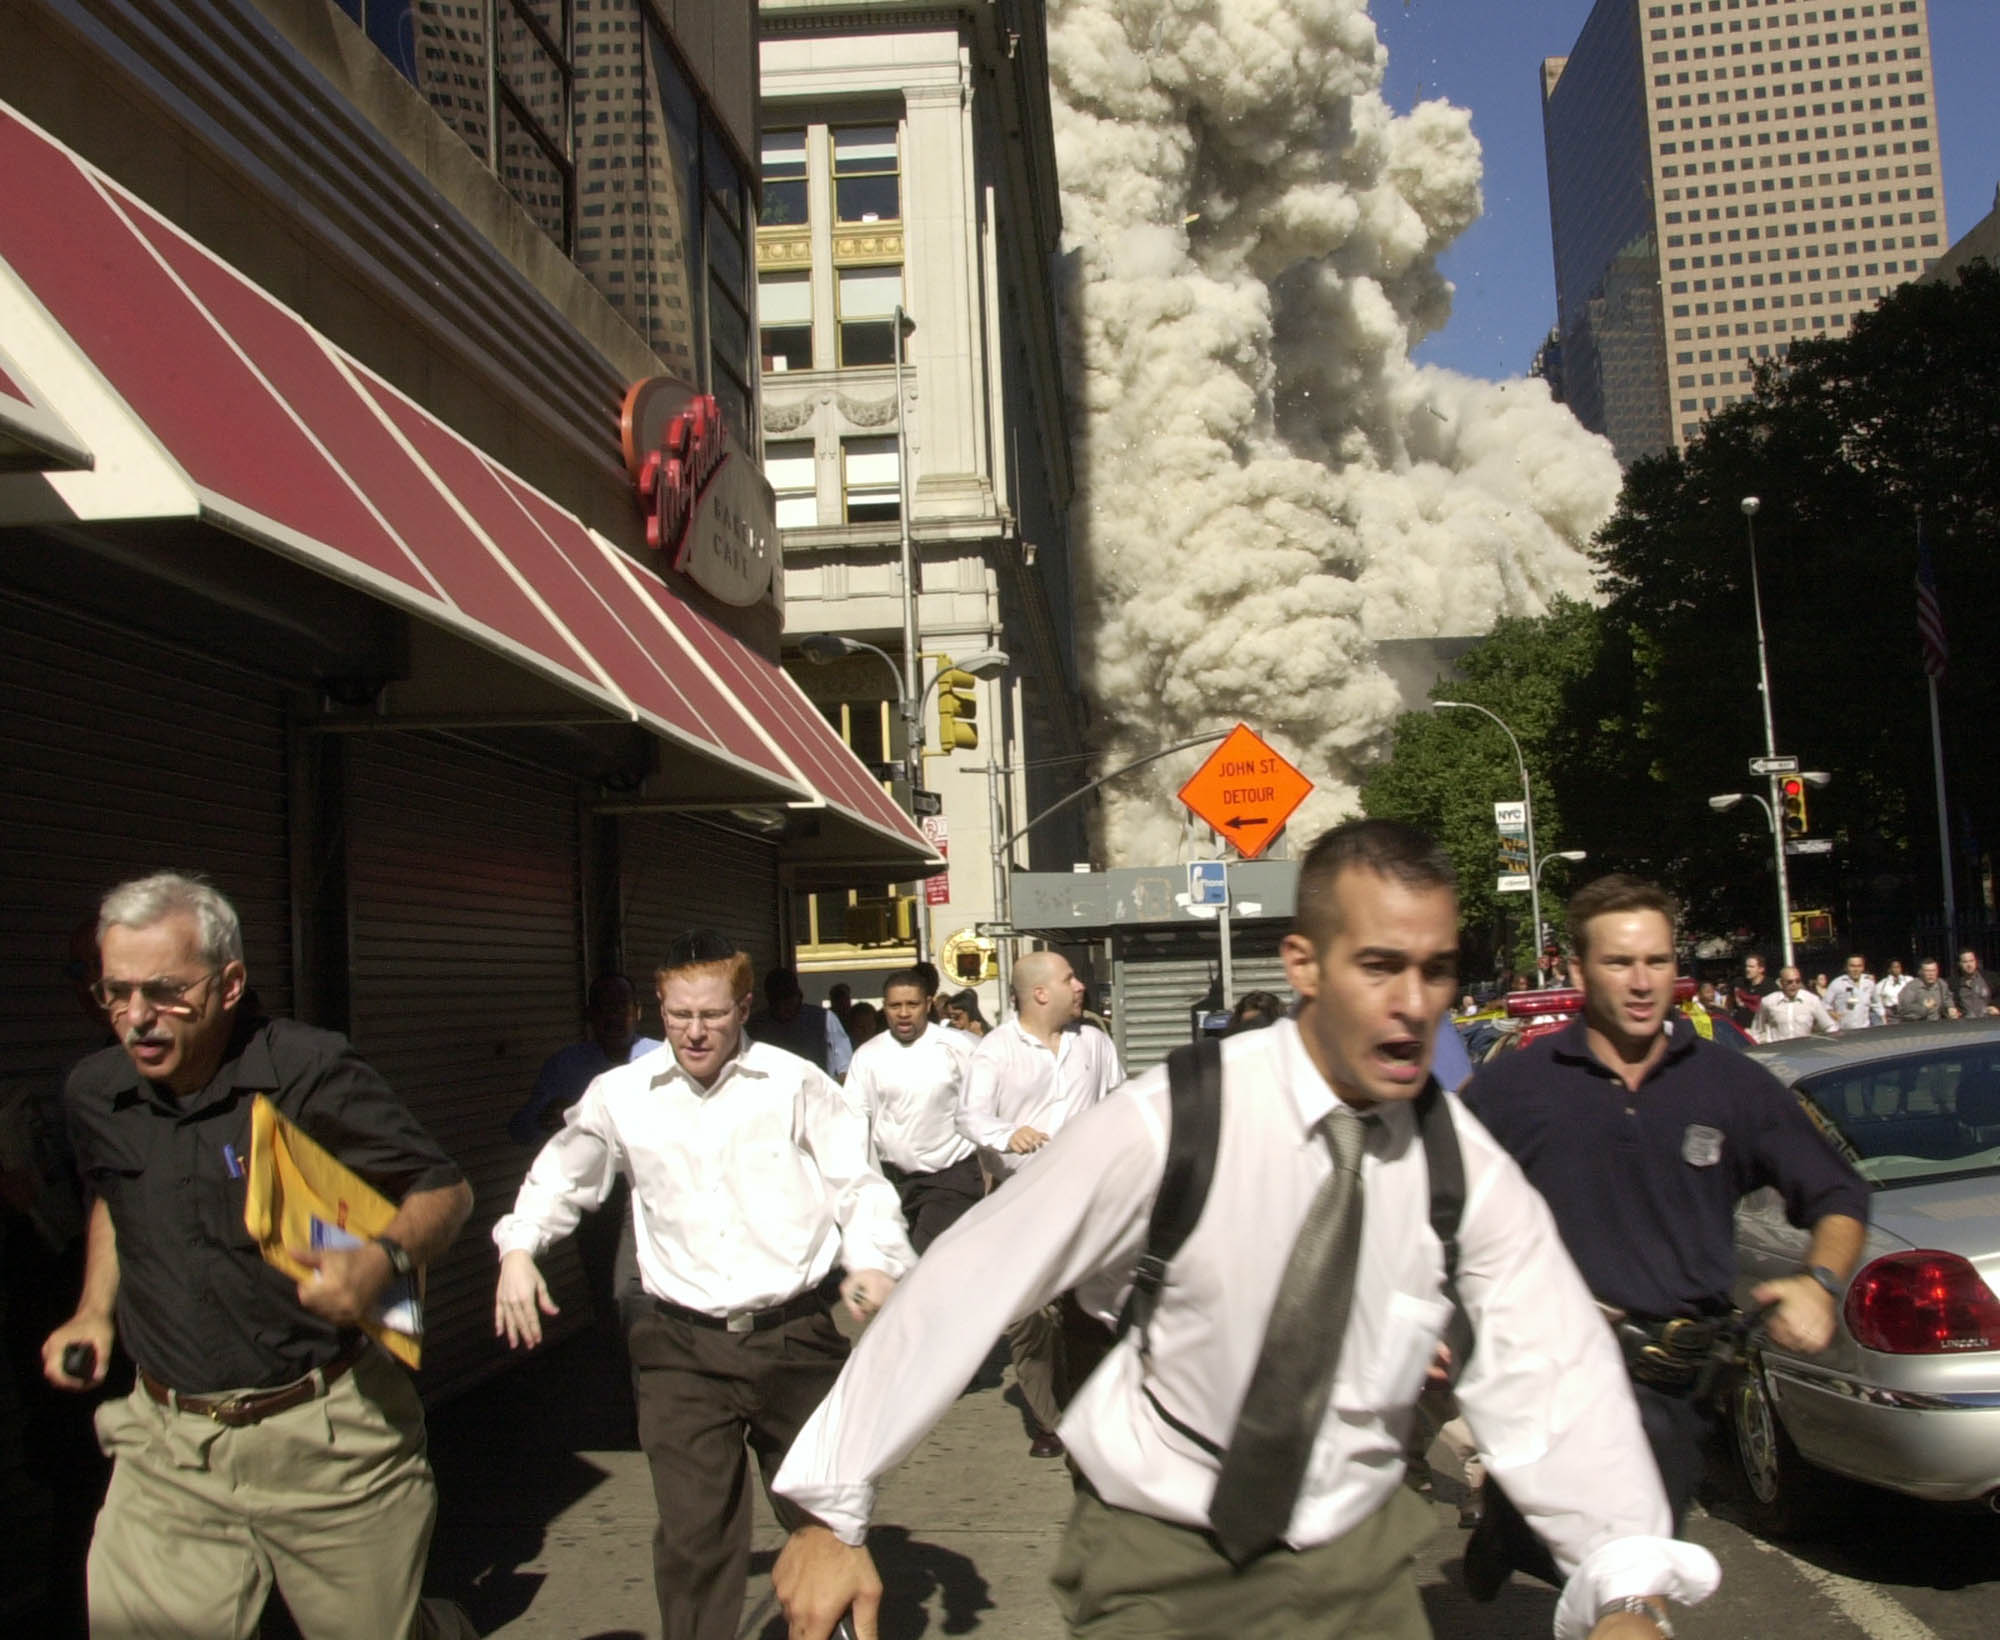 People run from the collapse of World Trade Center Tower Tuesday, September 11, 2001 in New York, USA. (KEYSTONE/AP Photo/Suzanne Plunkett)